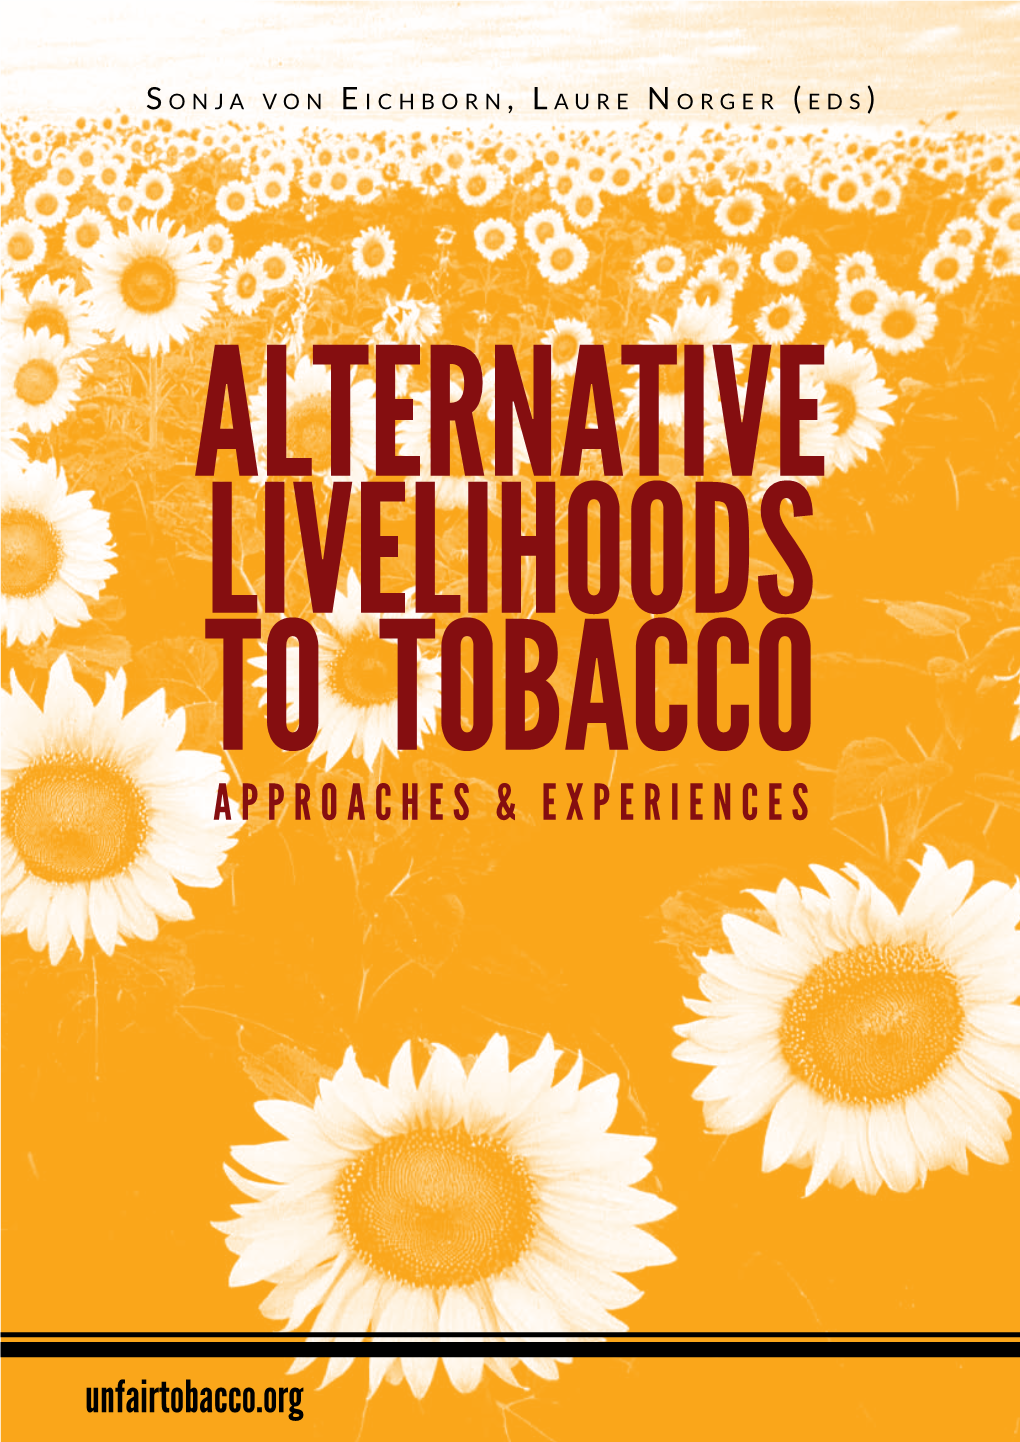 ALTERNATIVE LIVELIHOODS to TOBACCO Approaches & Experiences